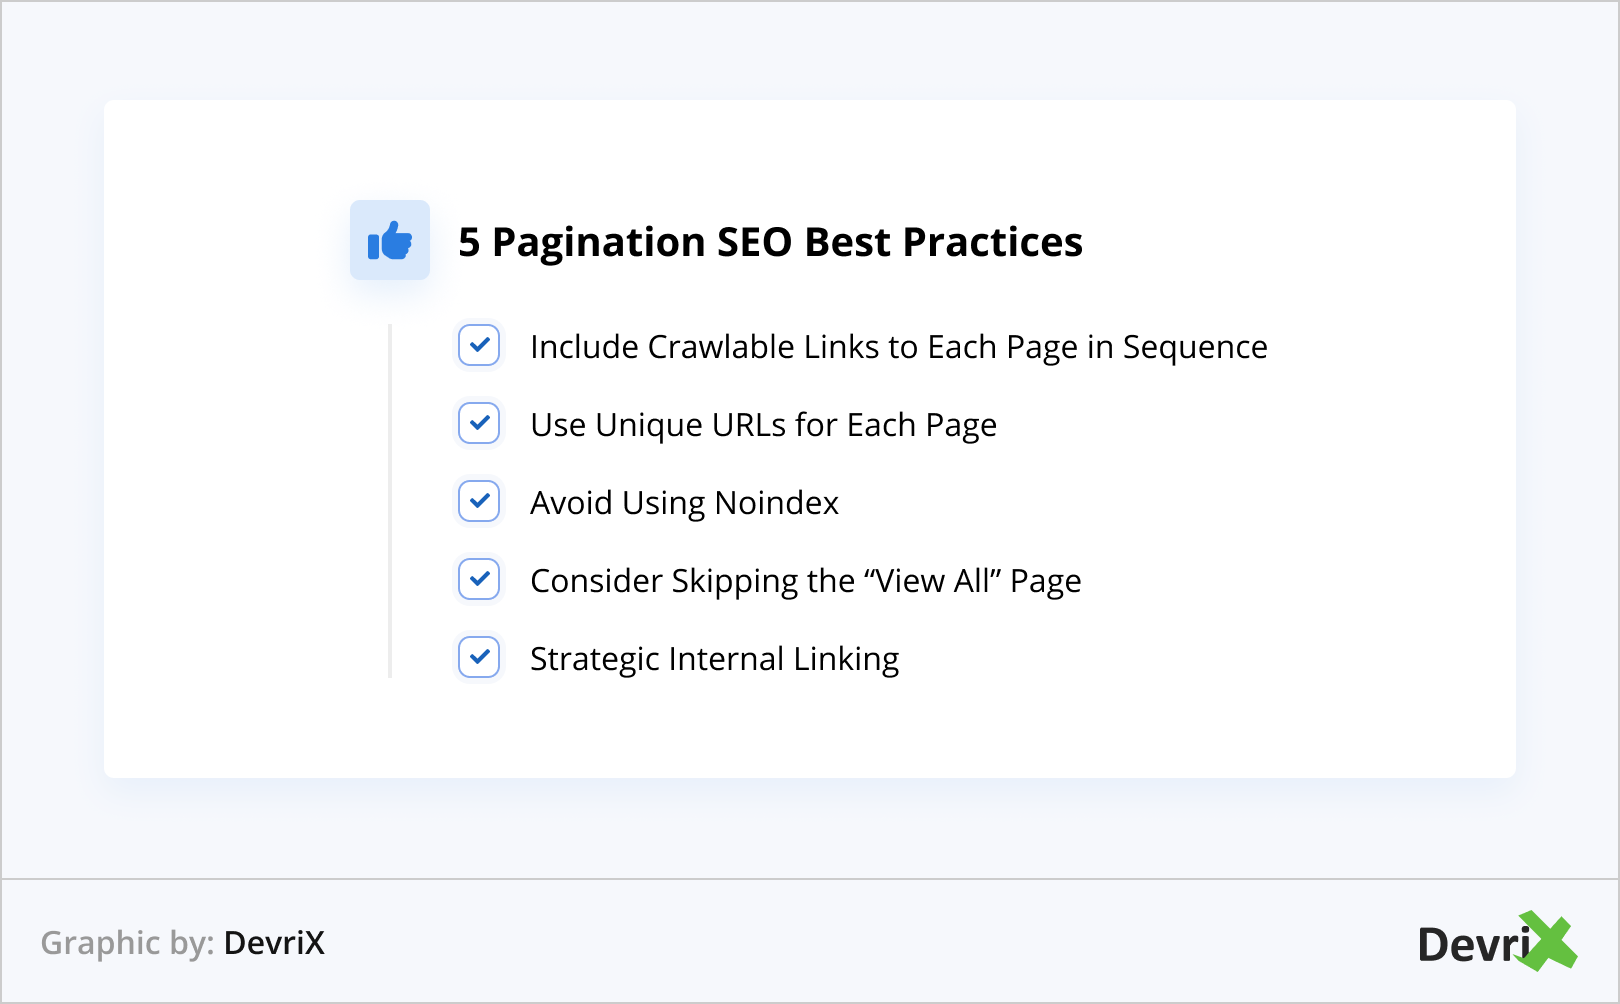 Pagination SEO Best Practices How to Paginate Your Content the Right Way